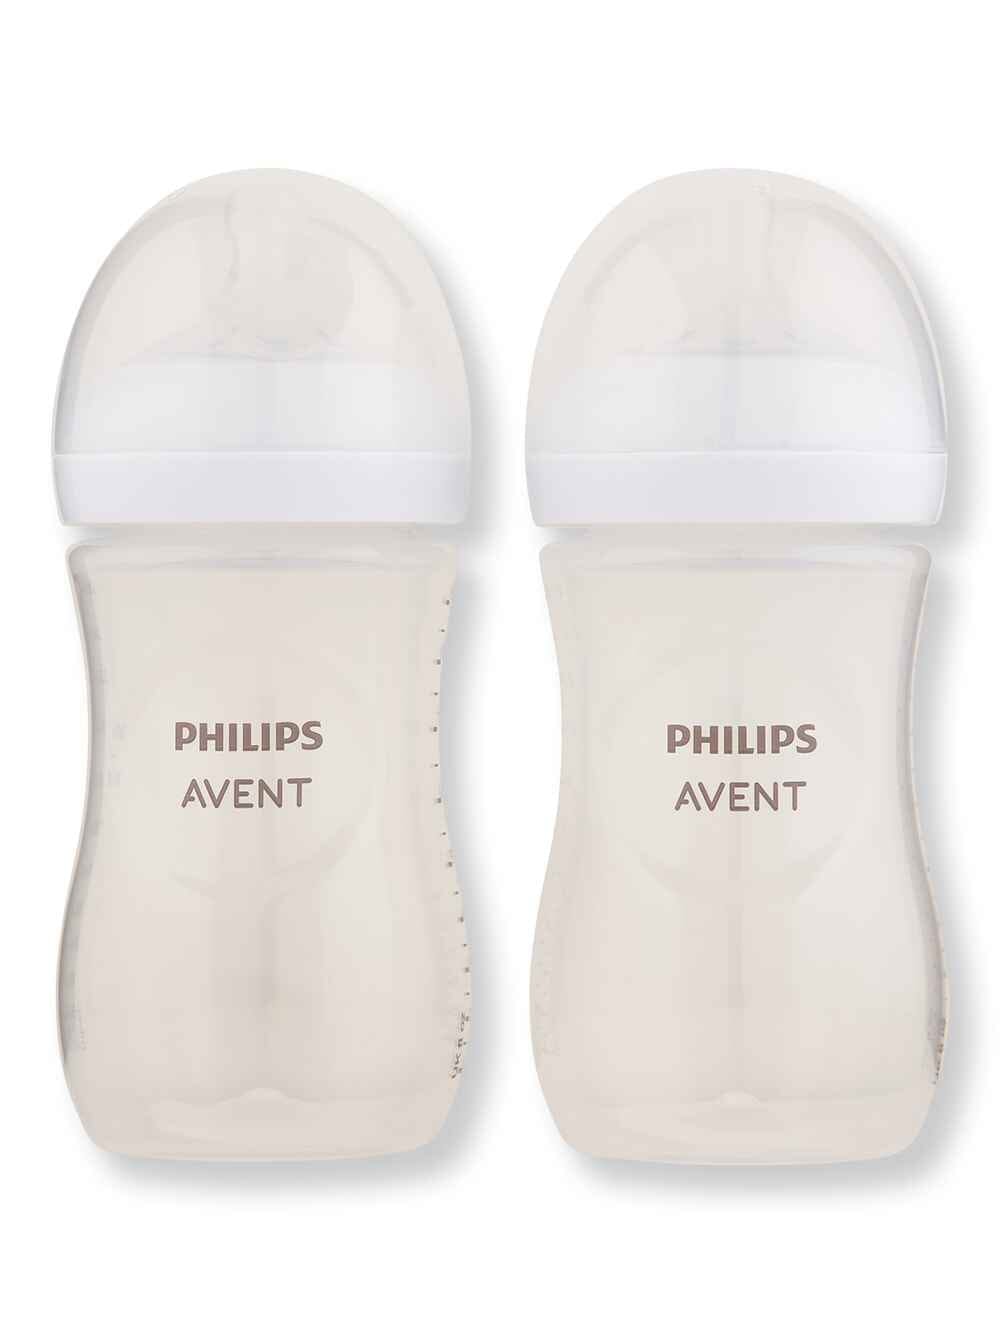 Philips Avent Philips Avent Natural Baby Bottle With Natural Response Nipple Clear 9 oz 2 Ct Baby Bottles 